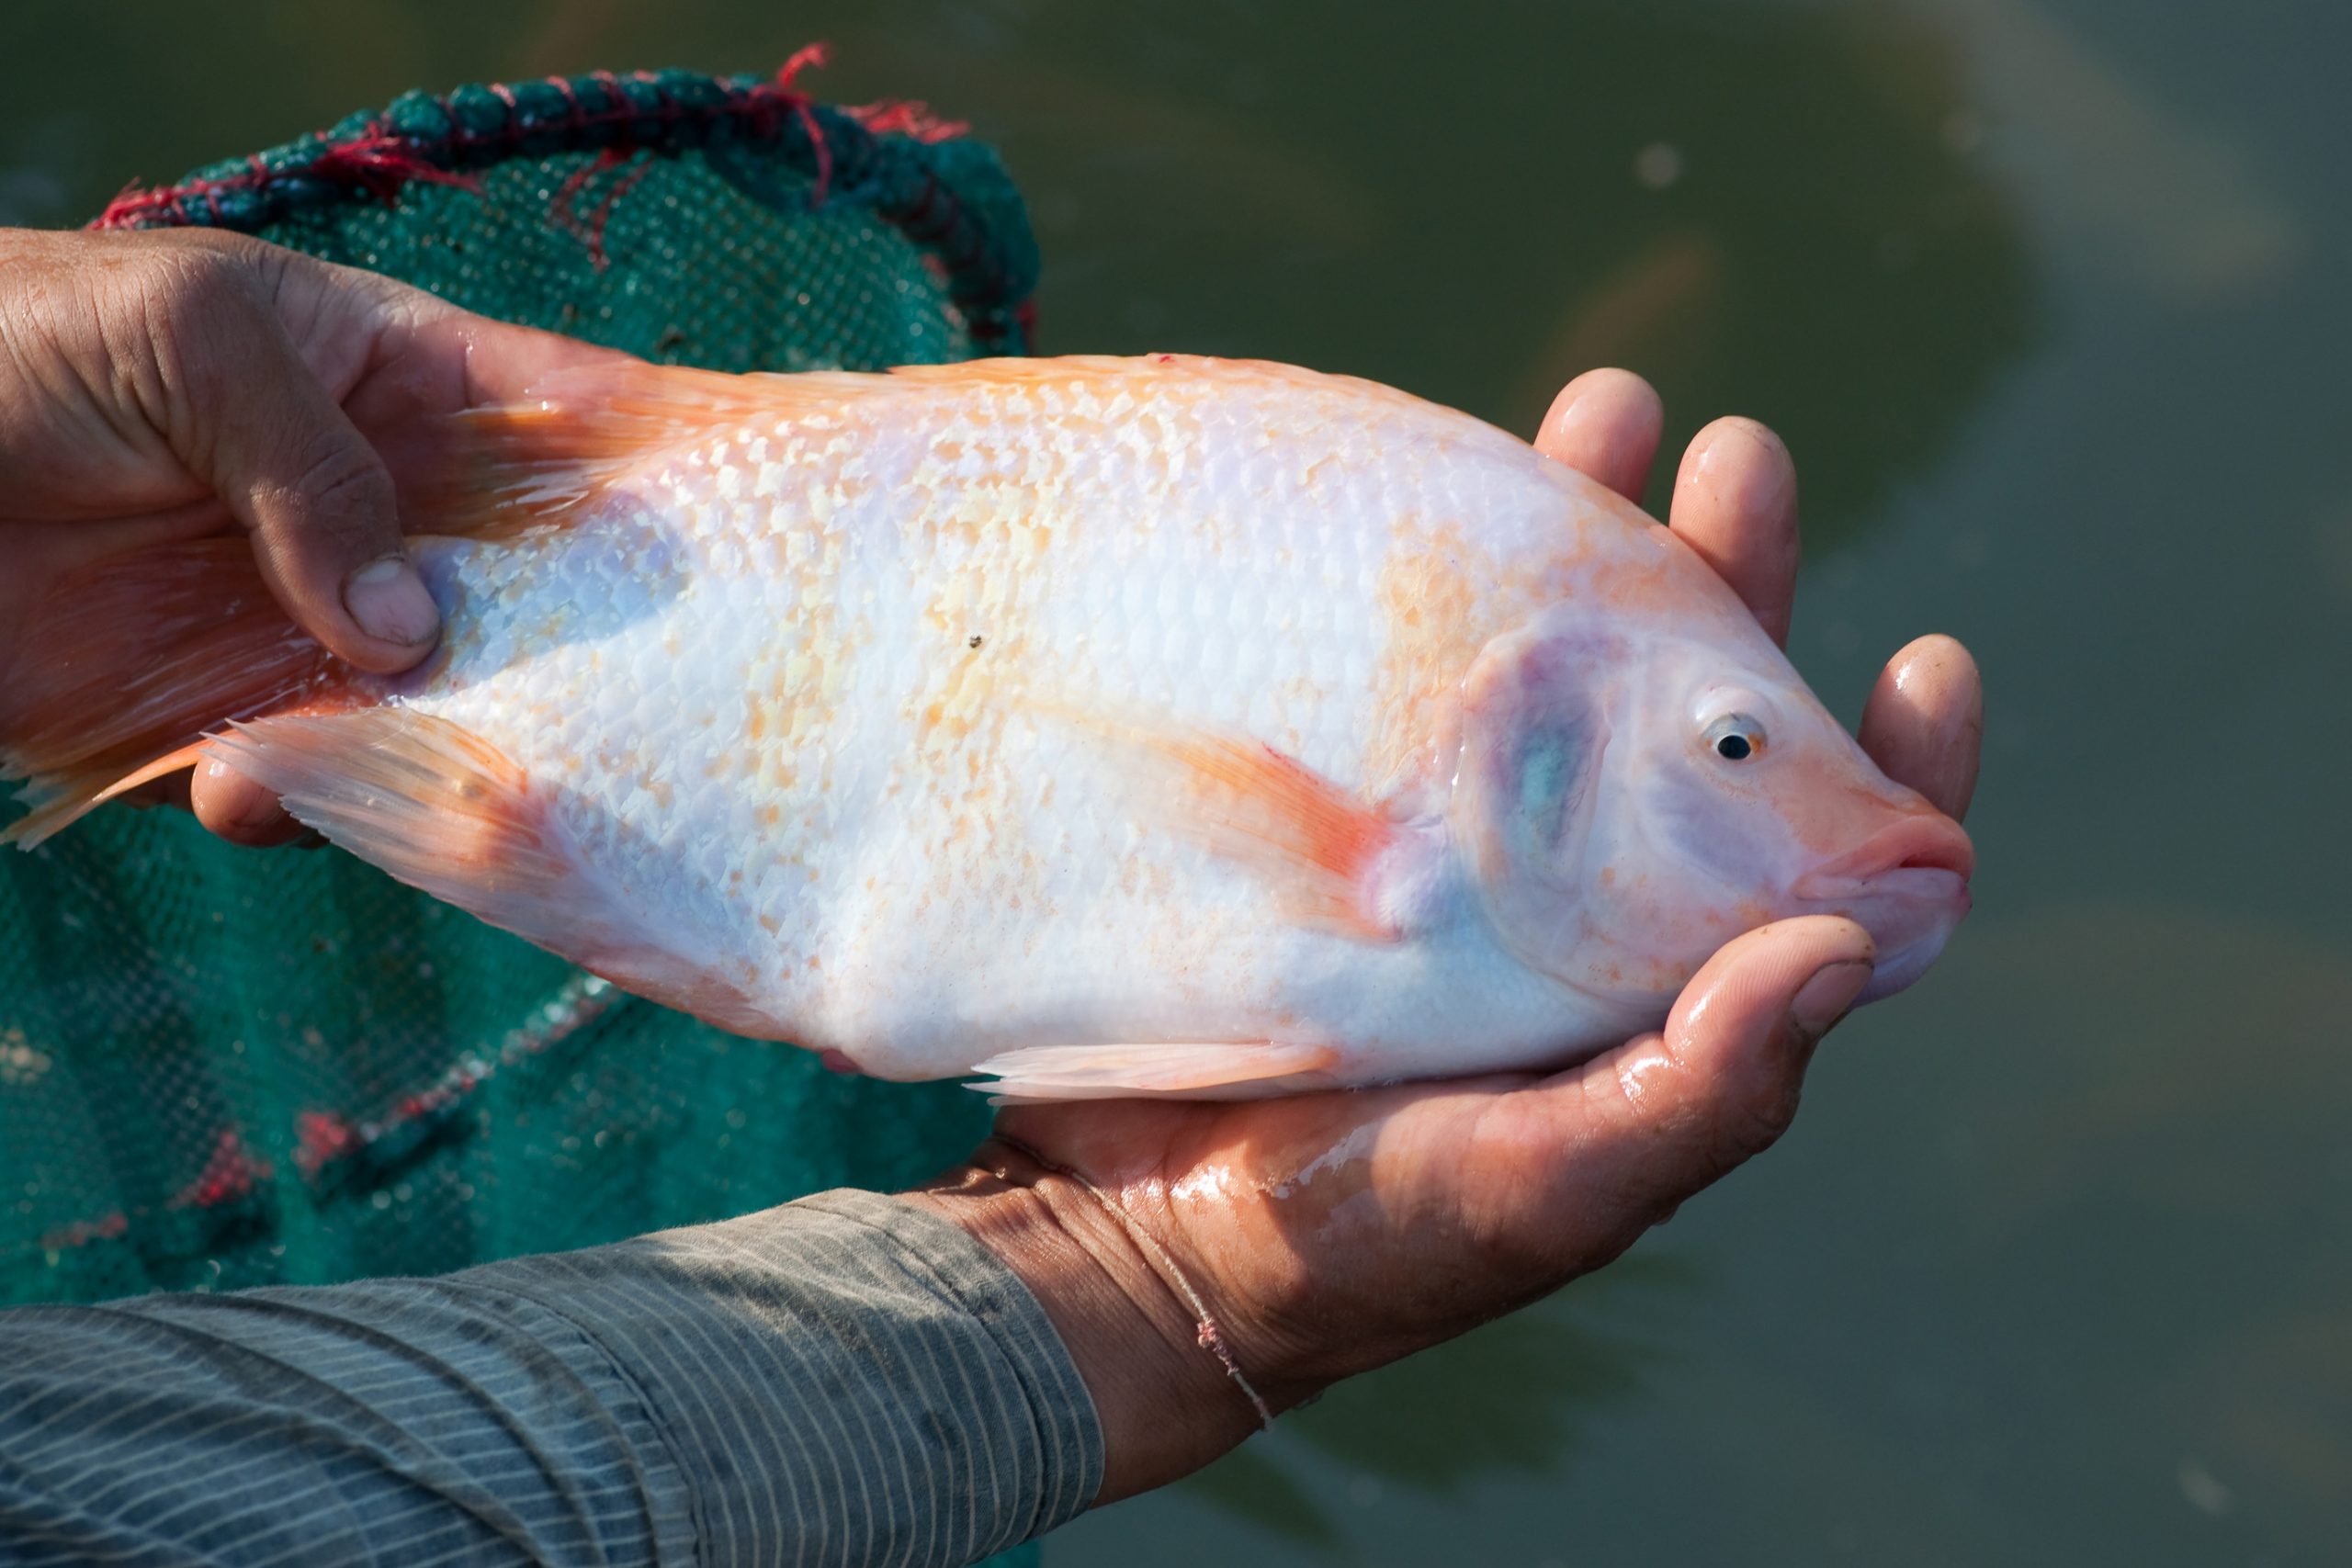 Fish growth by adding reproduction inhibitors. Photo: Dreamstime/Komkrit Muangchan